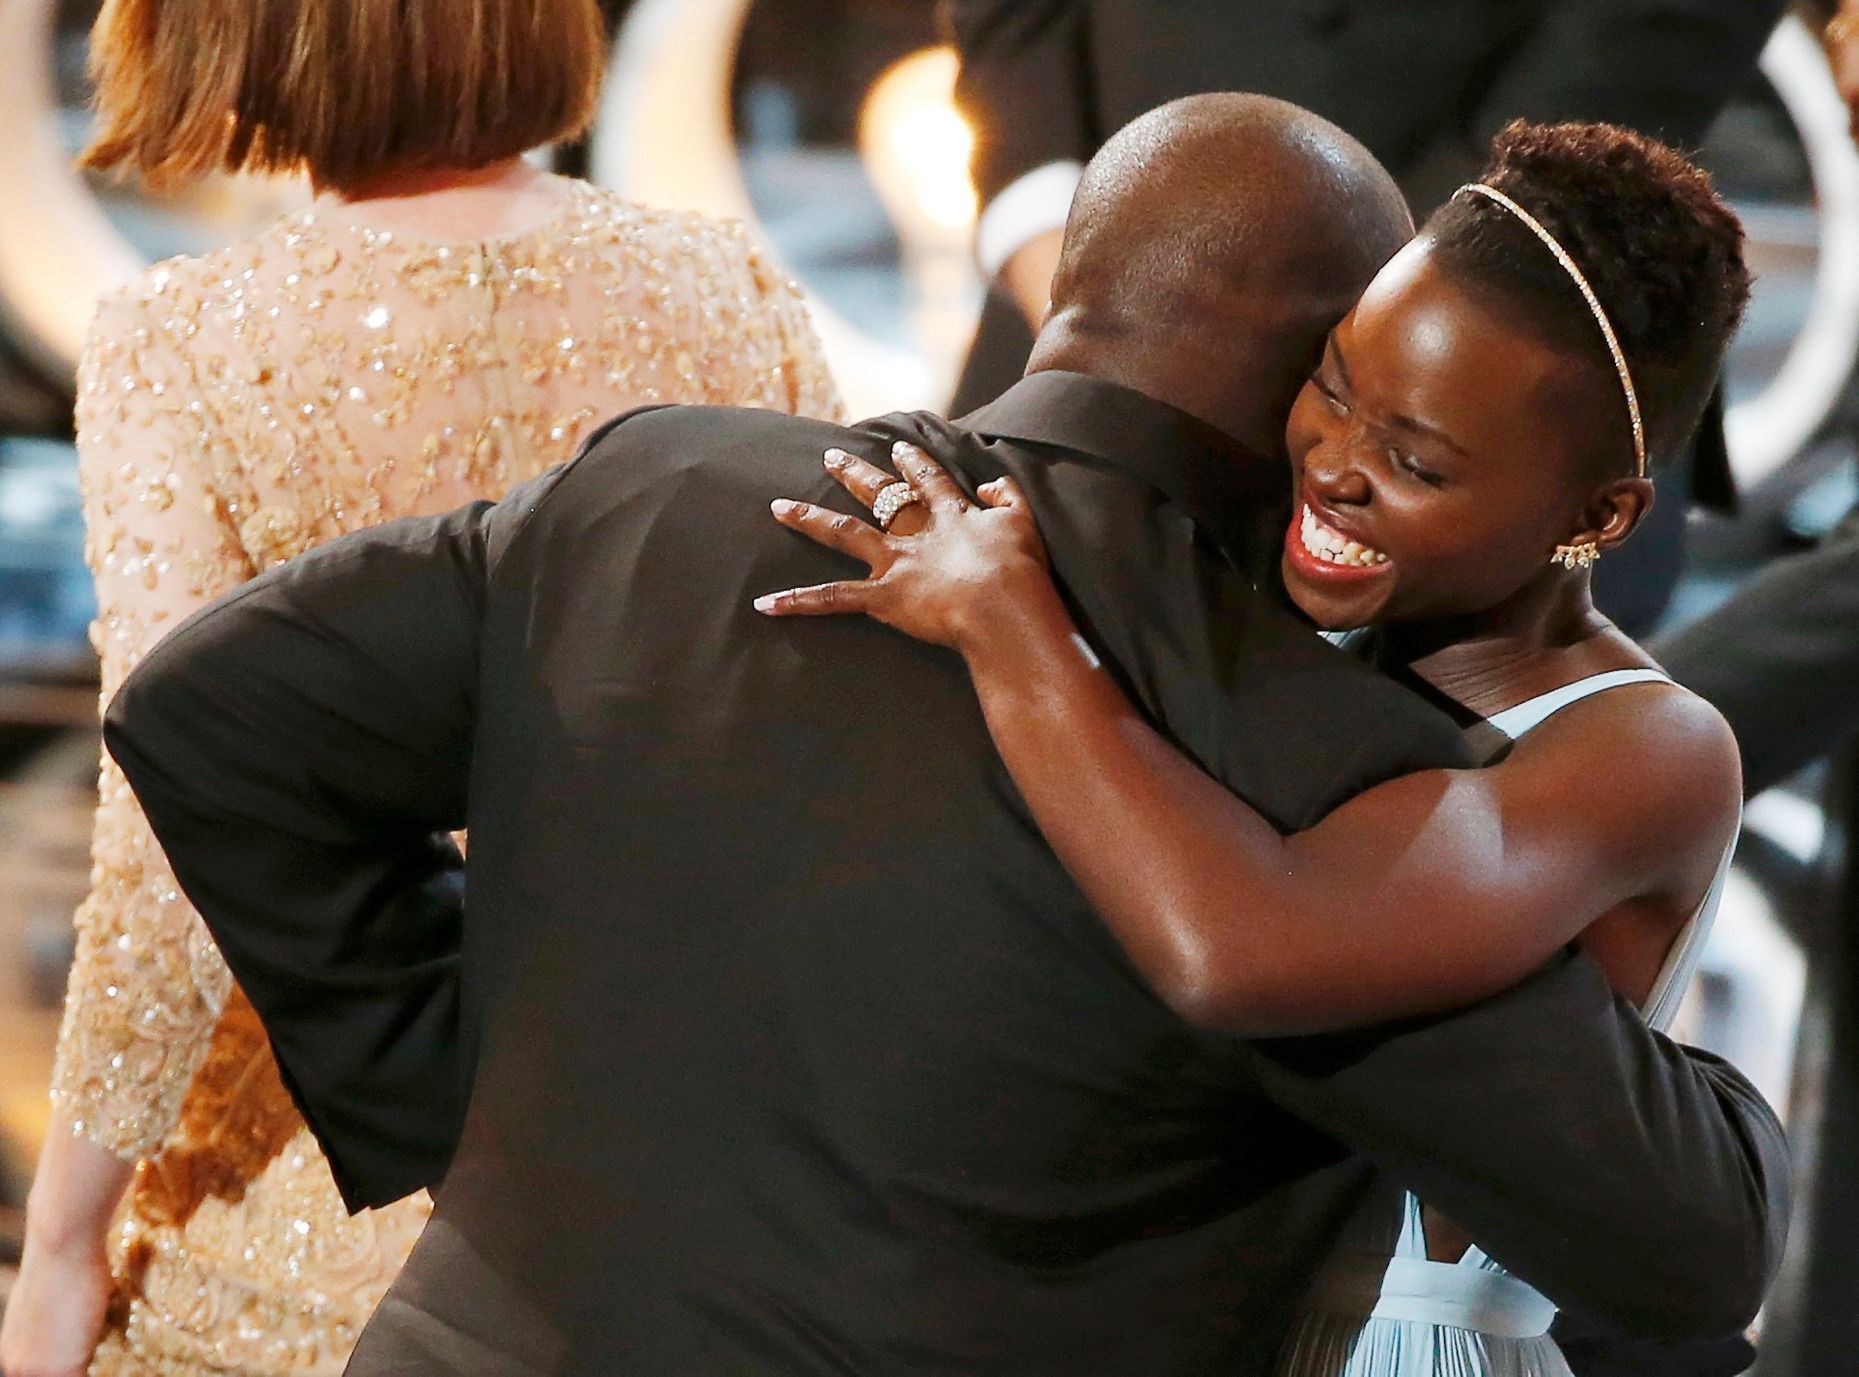 Director and producer McQueen celebrates with the Nyong'o after accepting the Oscar for best picture at the 86th Academy Awards in Hollywood